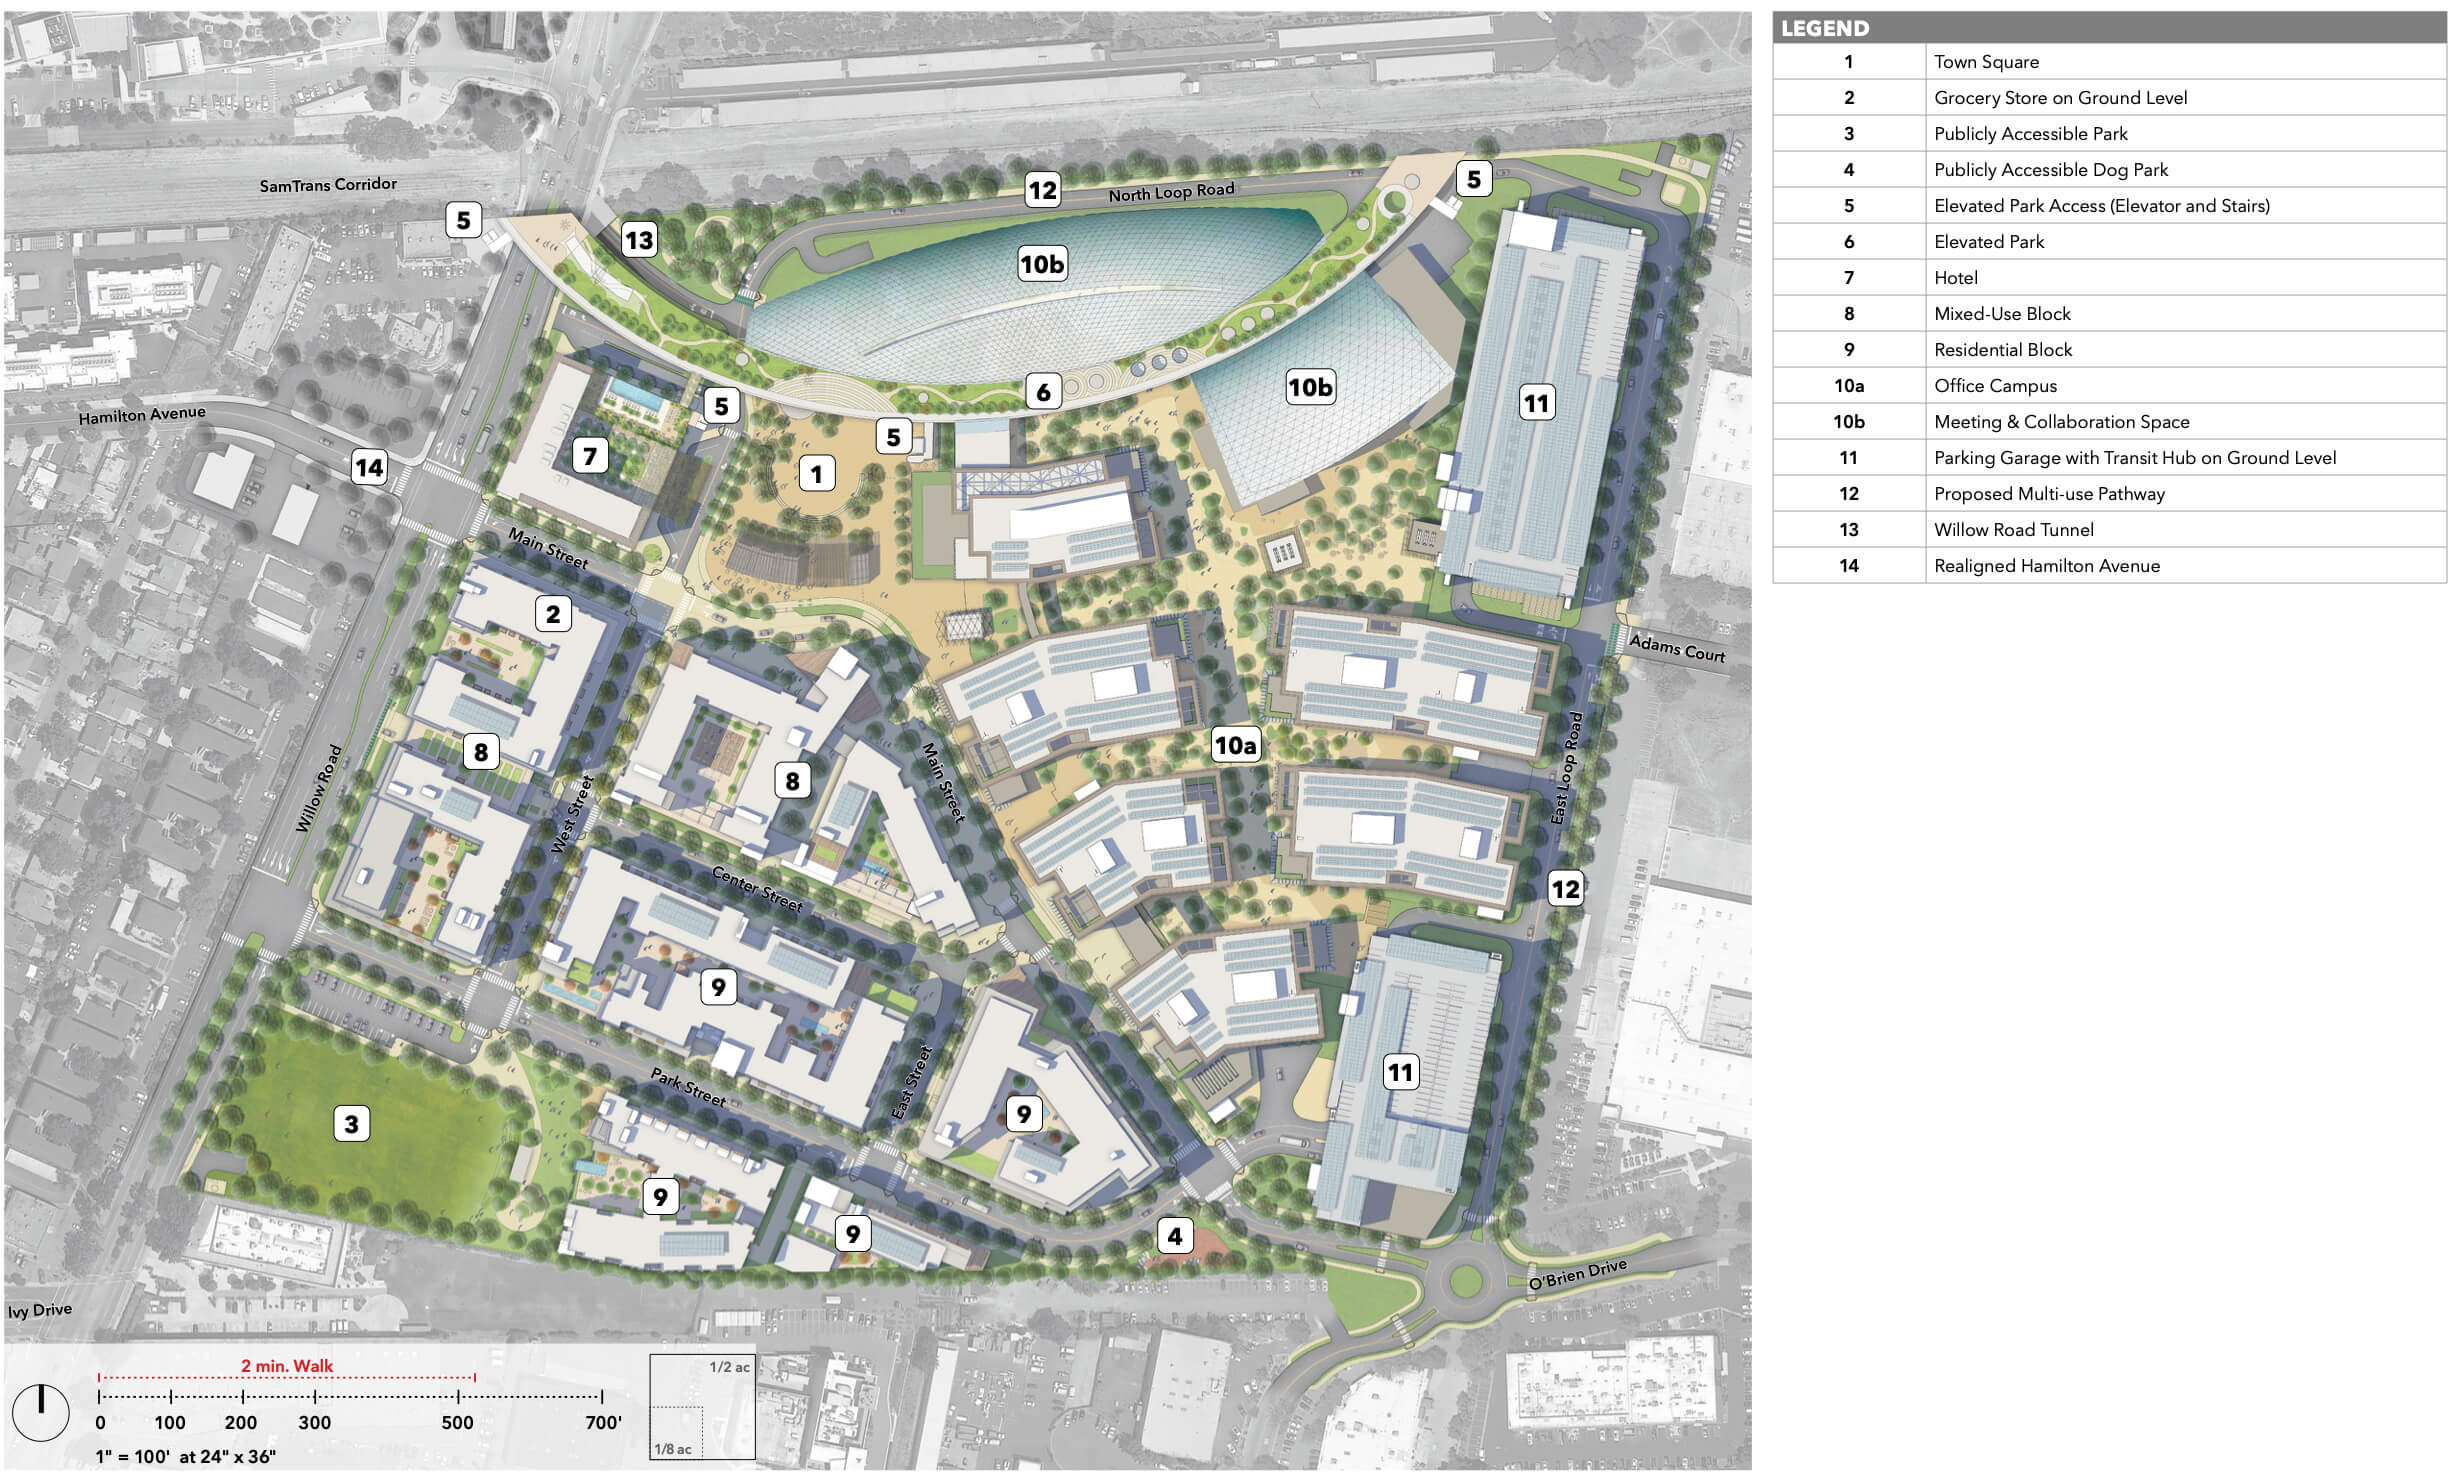 Aerial site plan of a mixed-use neighborhood arranged in a diamond pattern